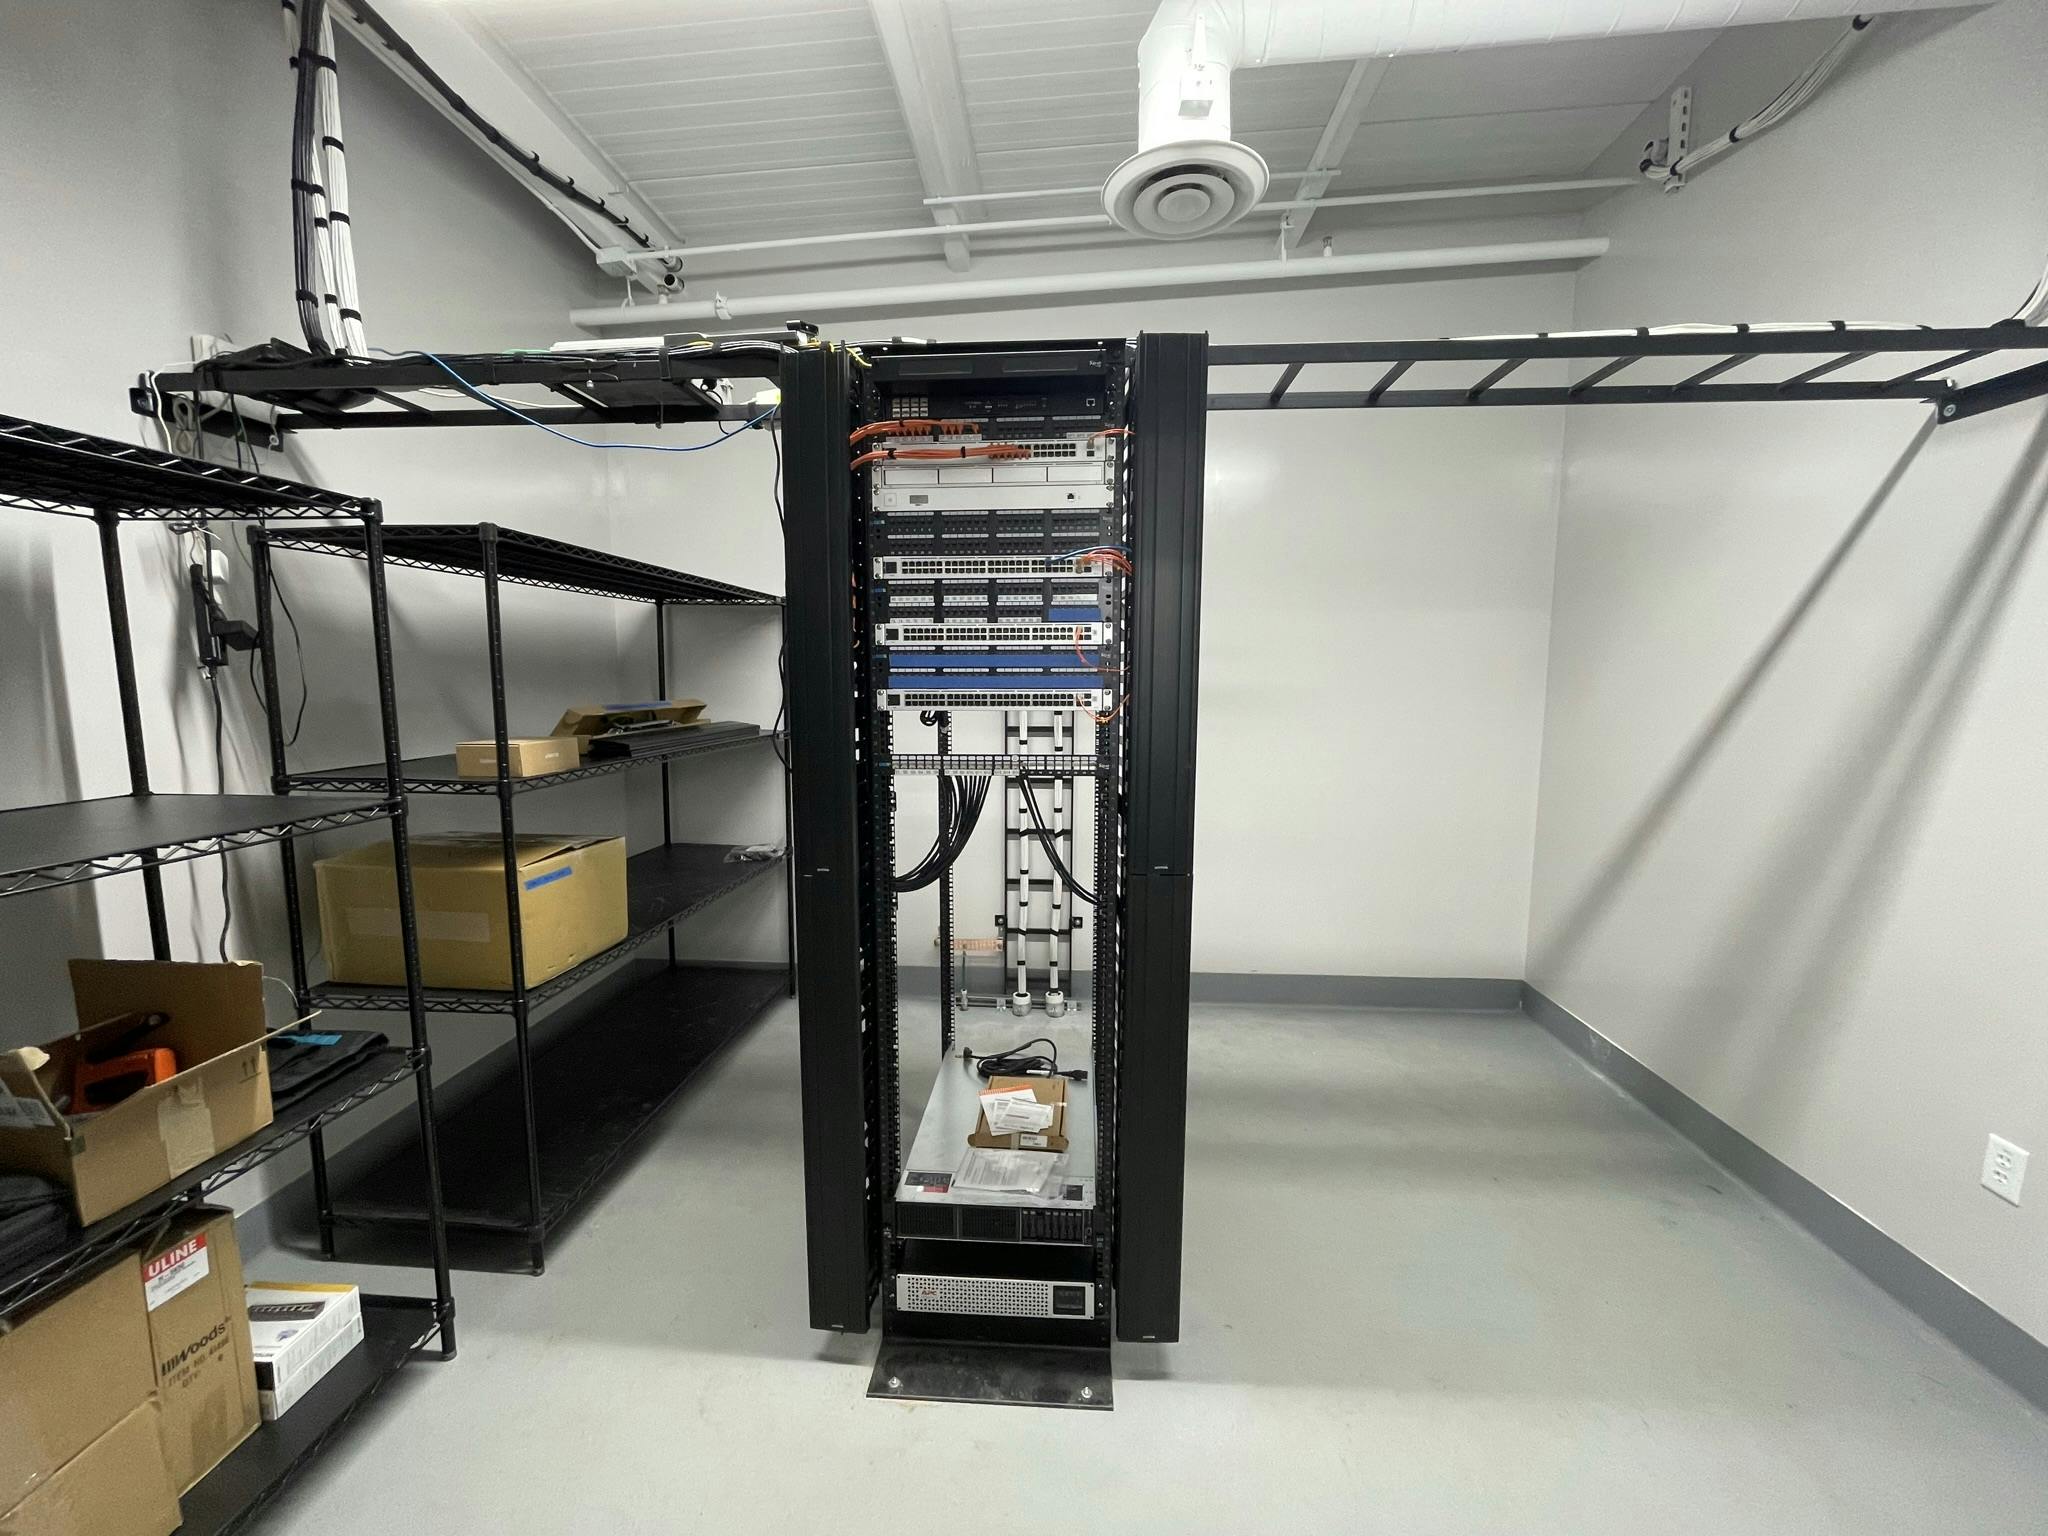 a wired and constructed server rack